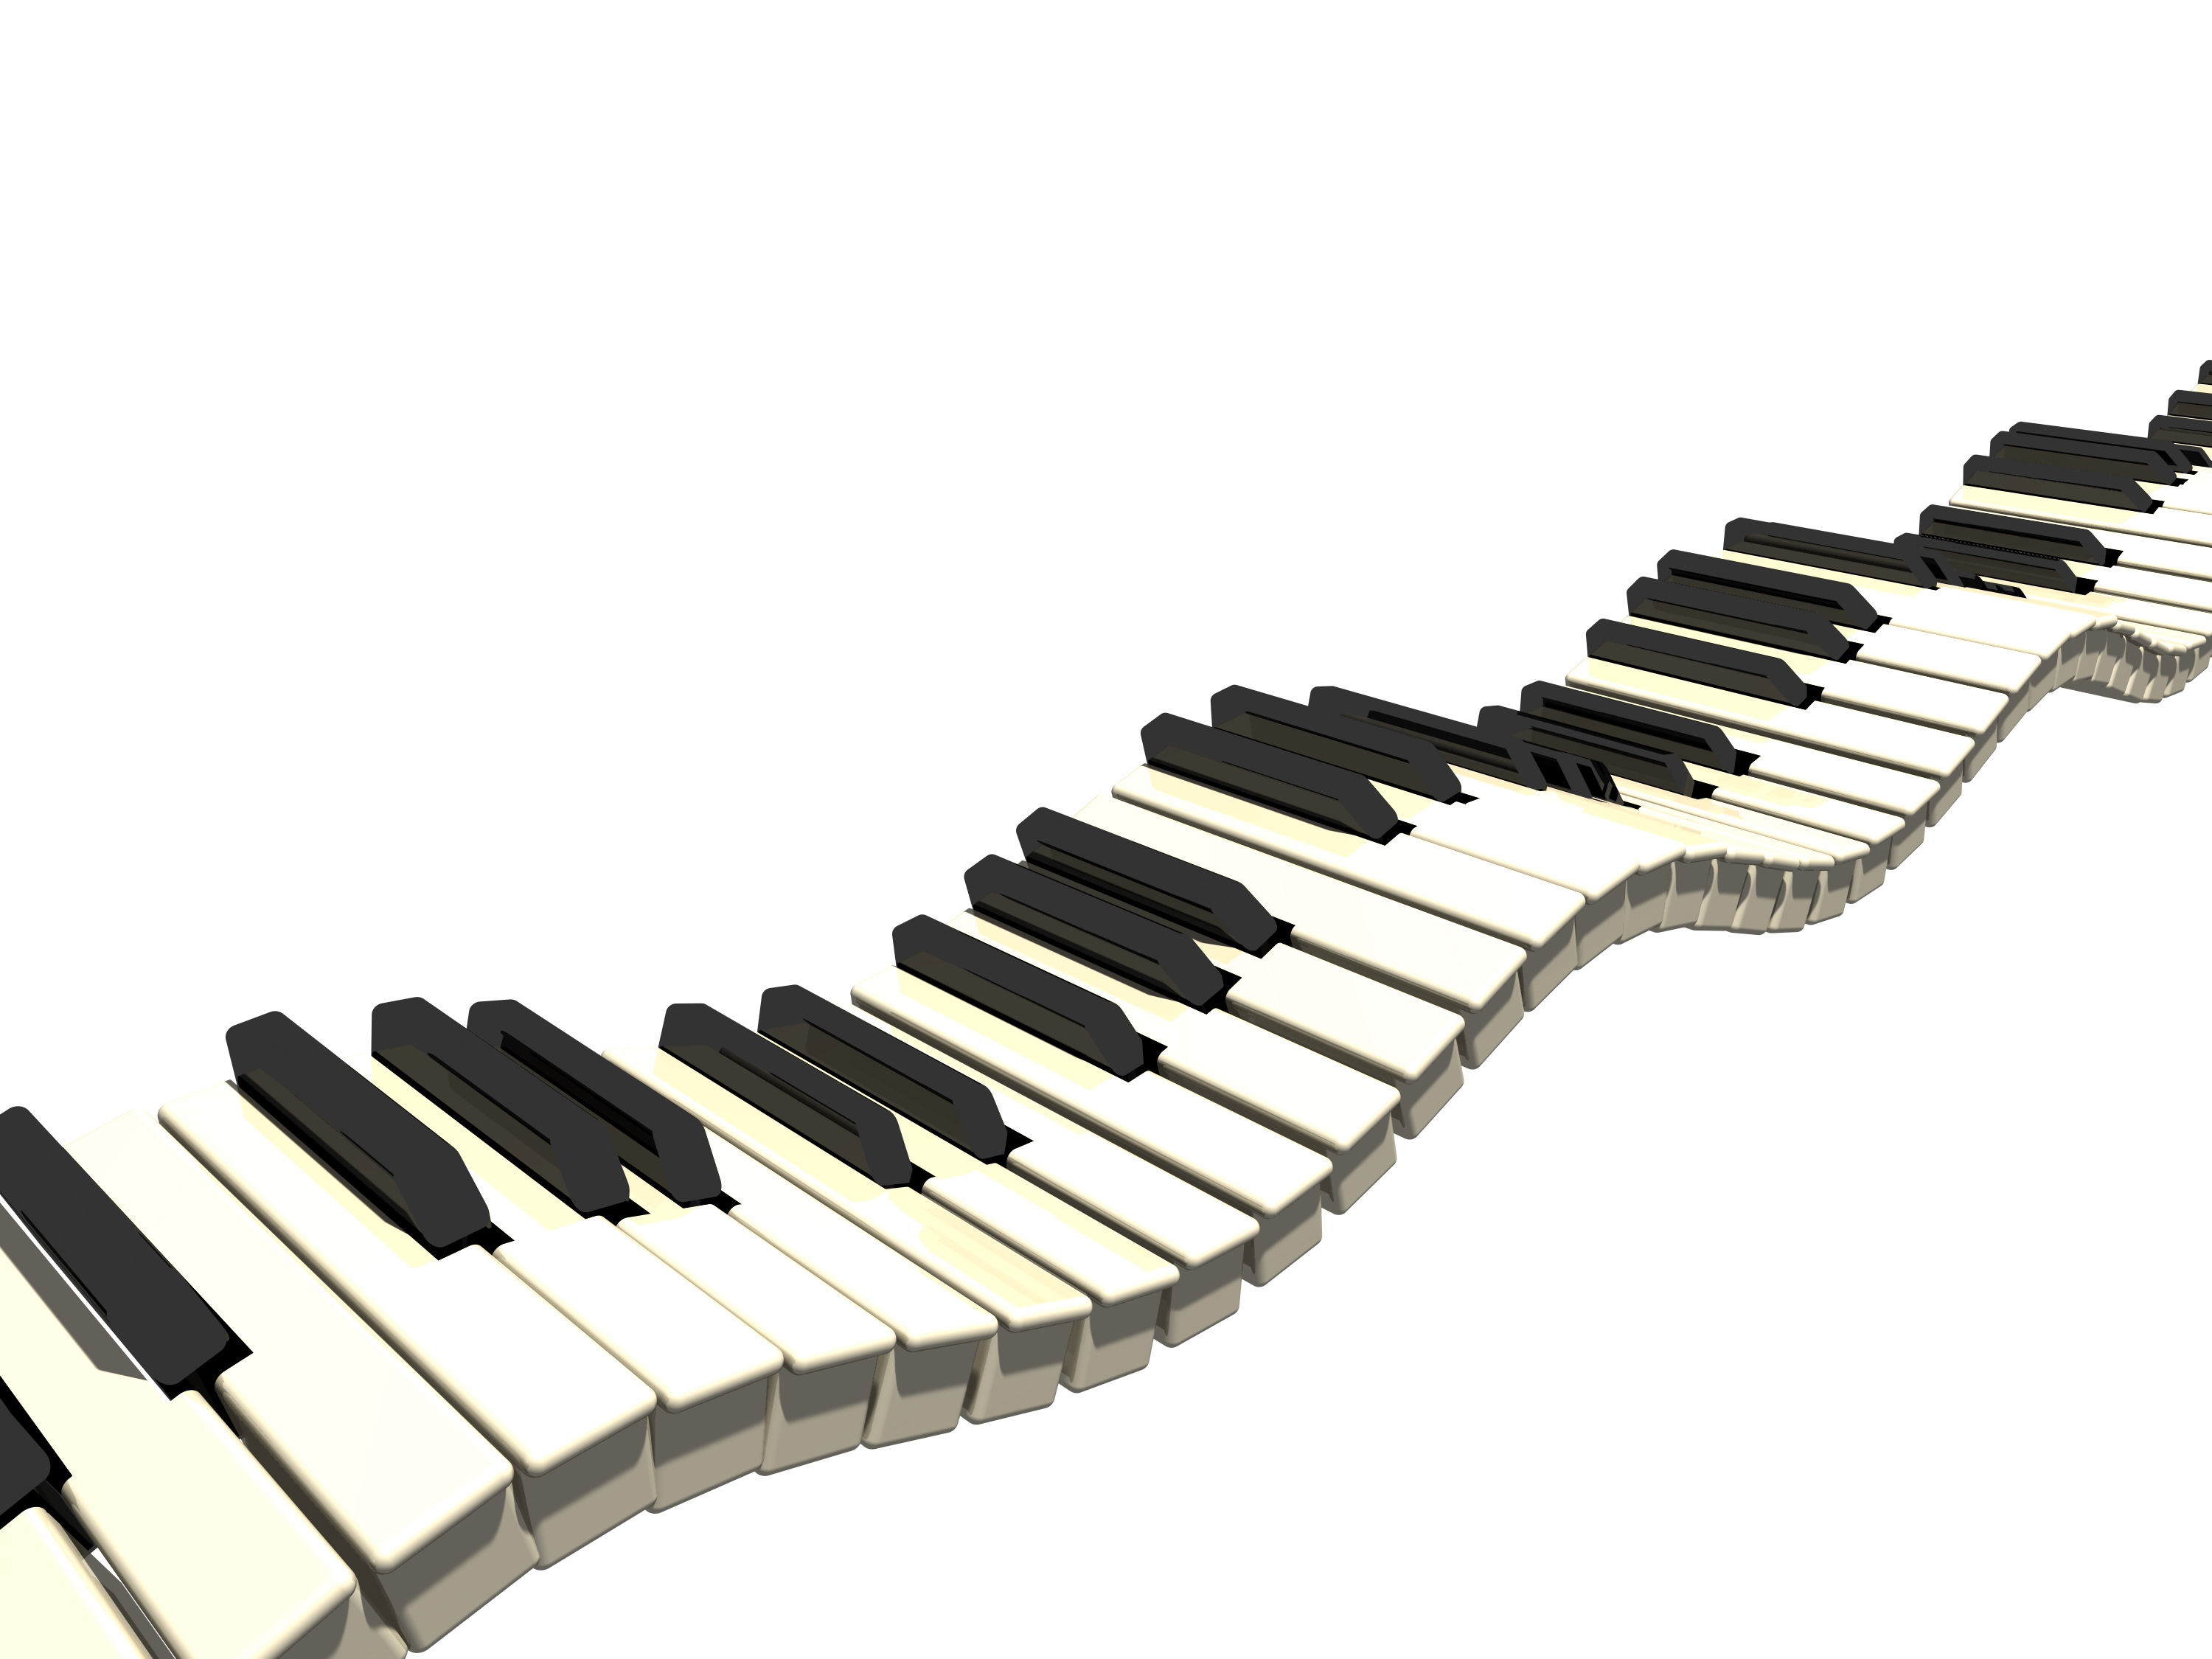 Images of keys on piano clipart